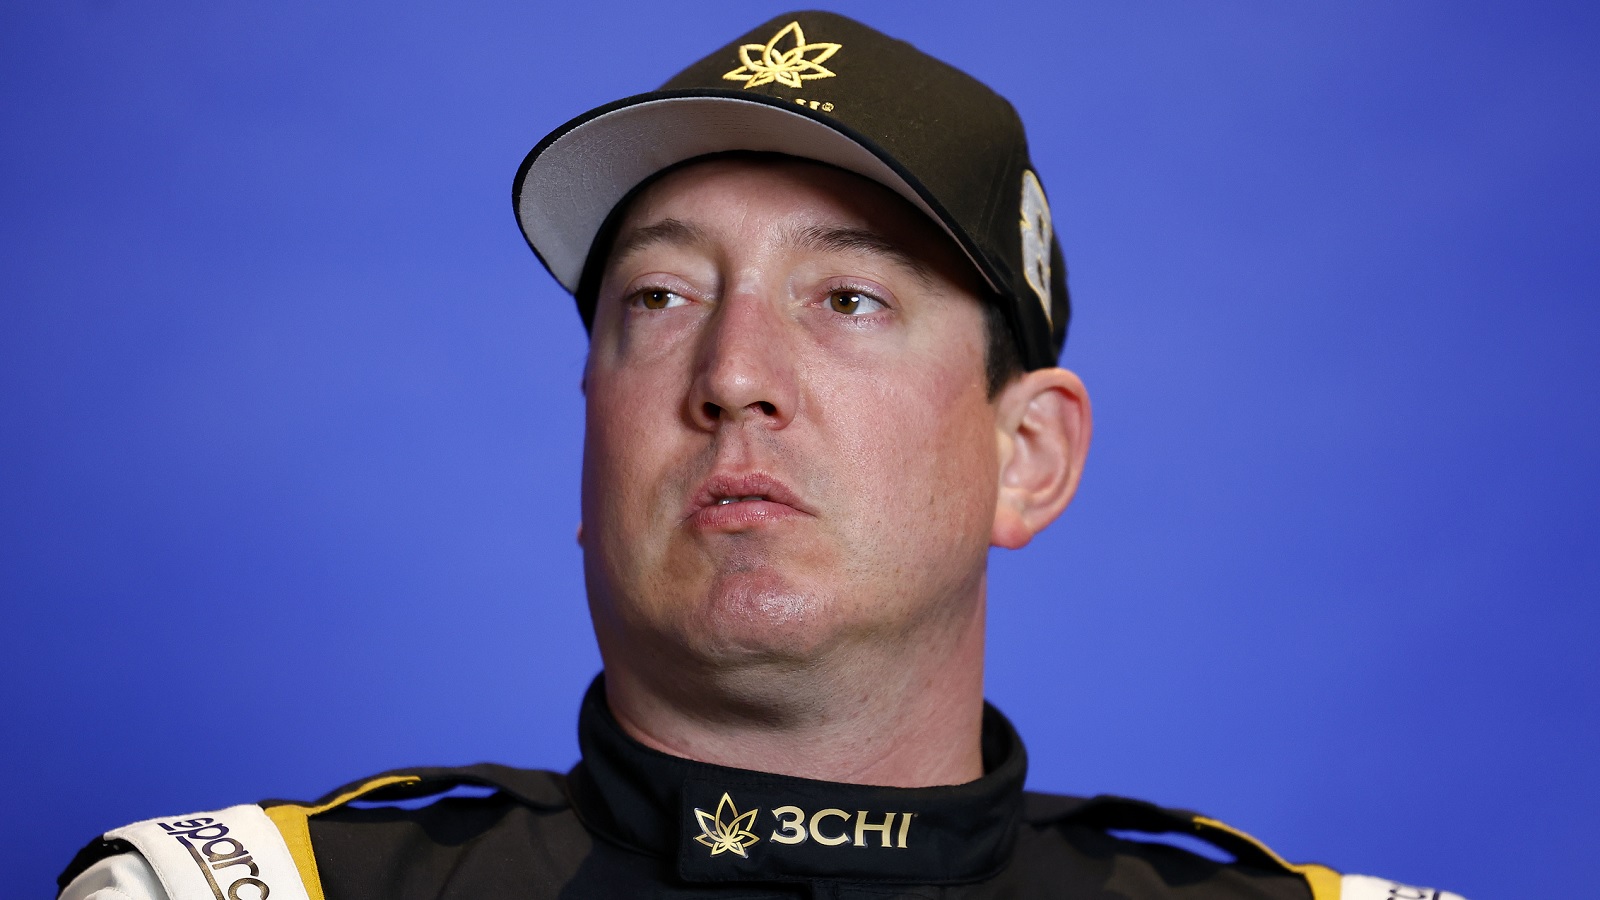 Kyle Busch Applauds Wife For Hilarious Roast Over “Inches” Comment